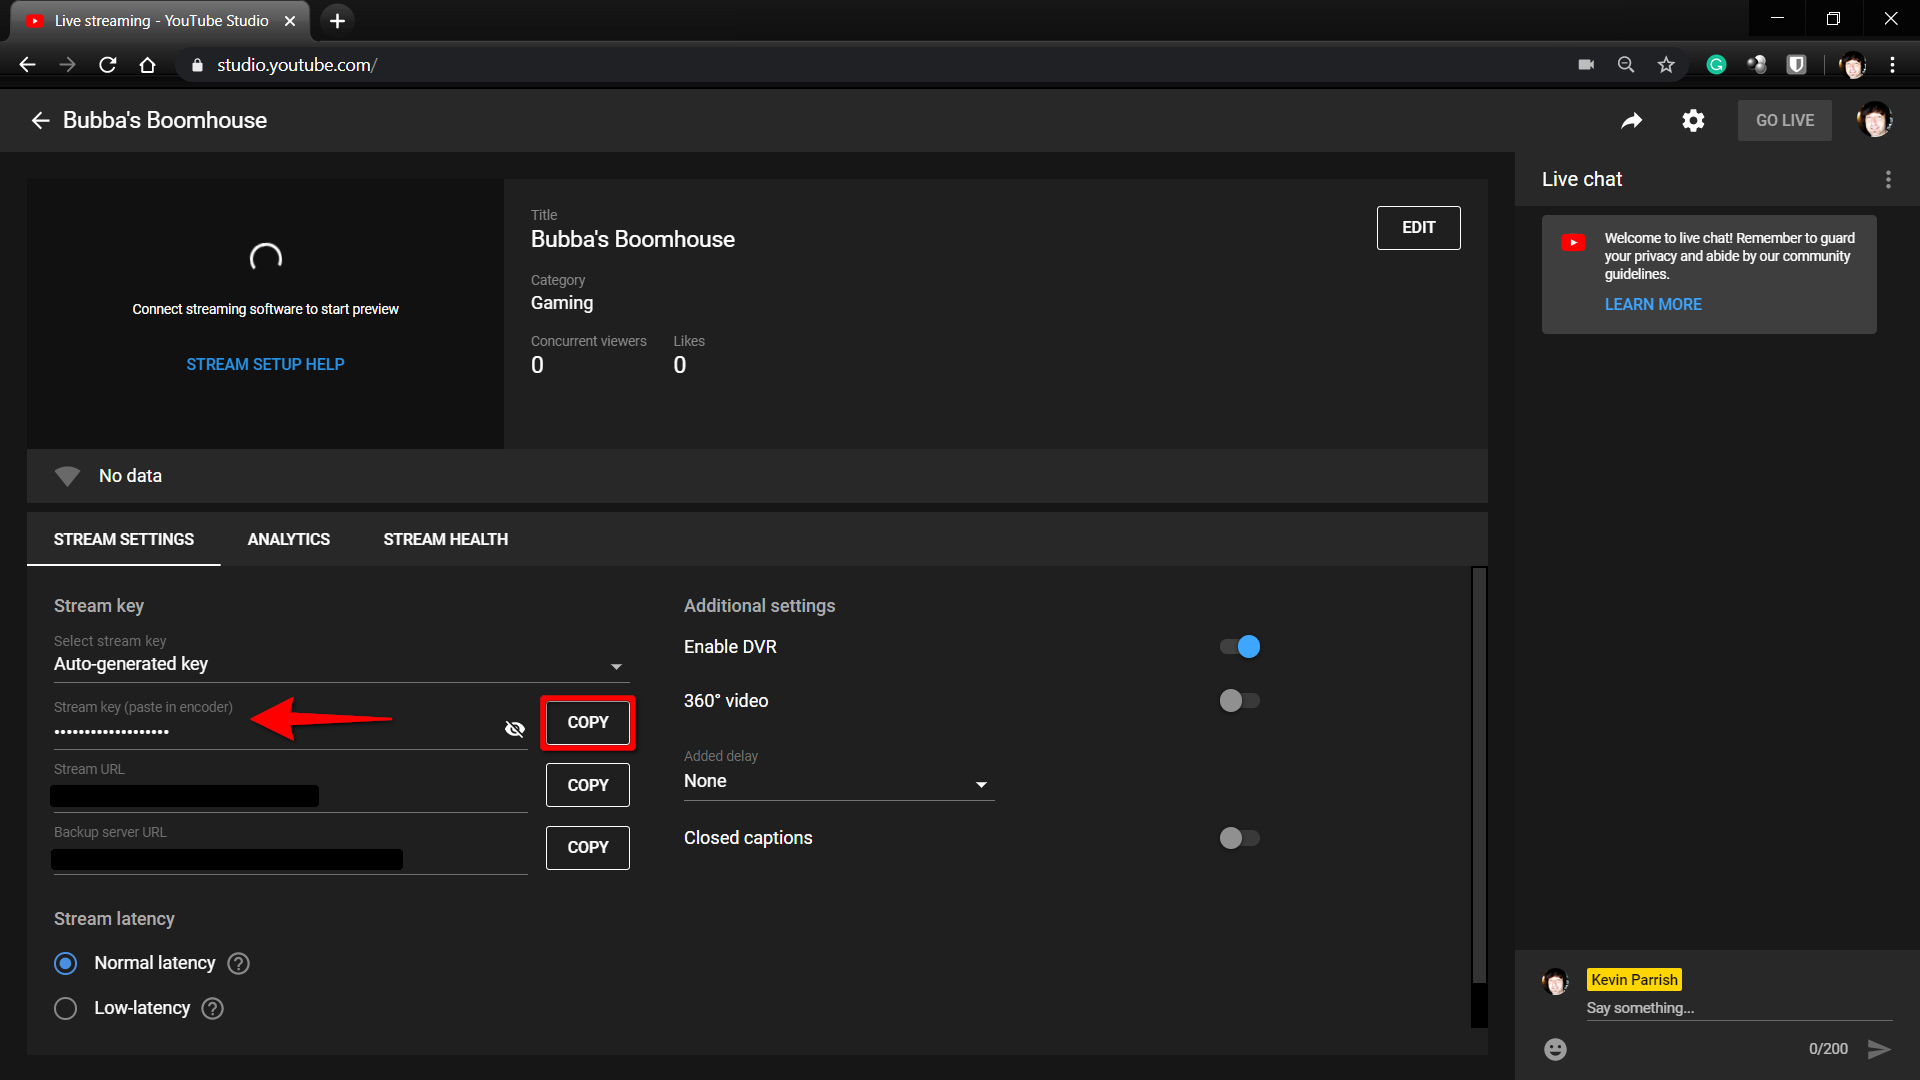 How To Add Live Subscriber Count or Follower Count to Streamlabs OBS 